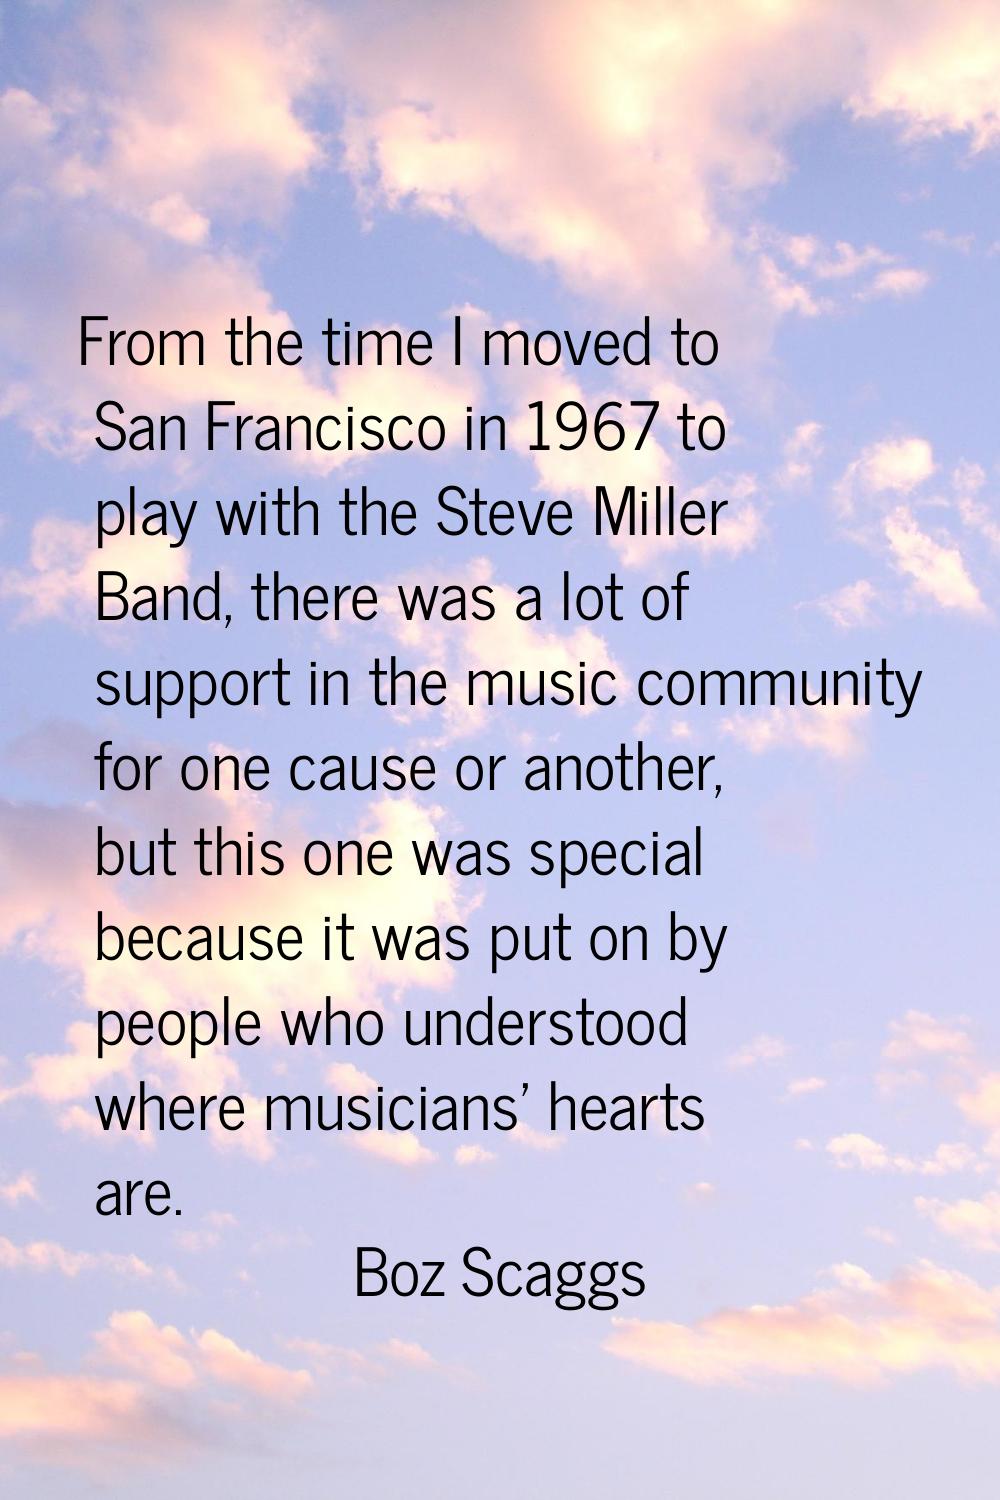 From the time I moved to San Francisco in 1967 to play with the Steve Miller Band, there was a lot 